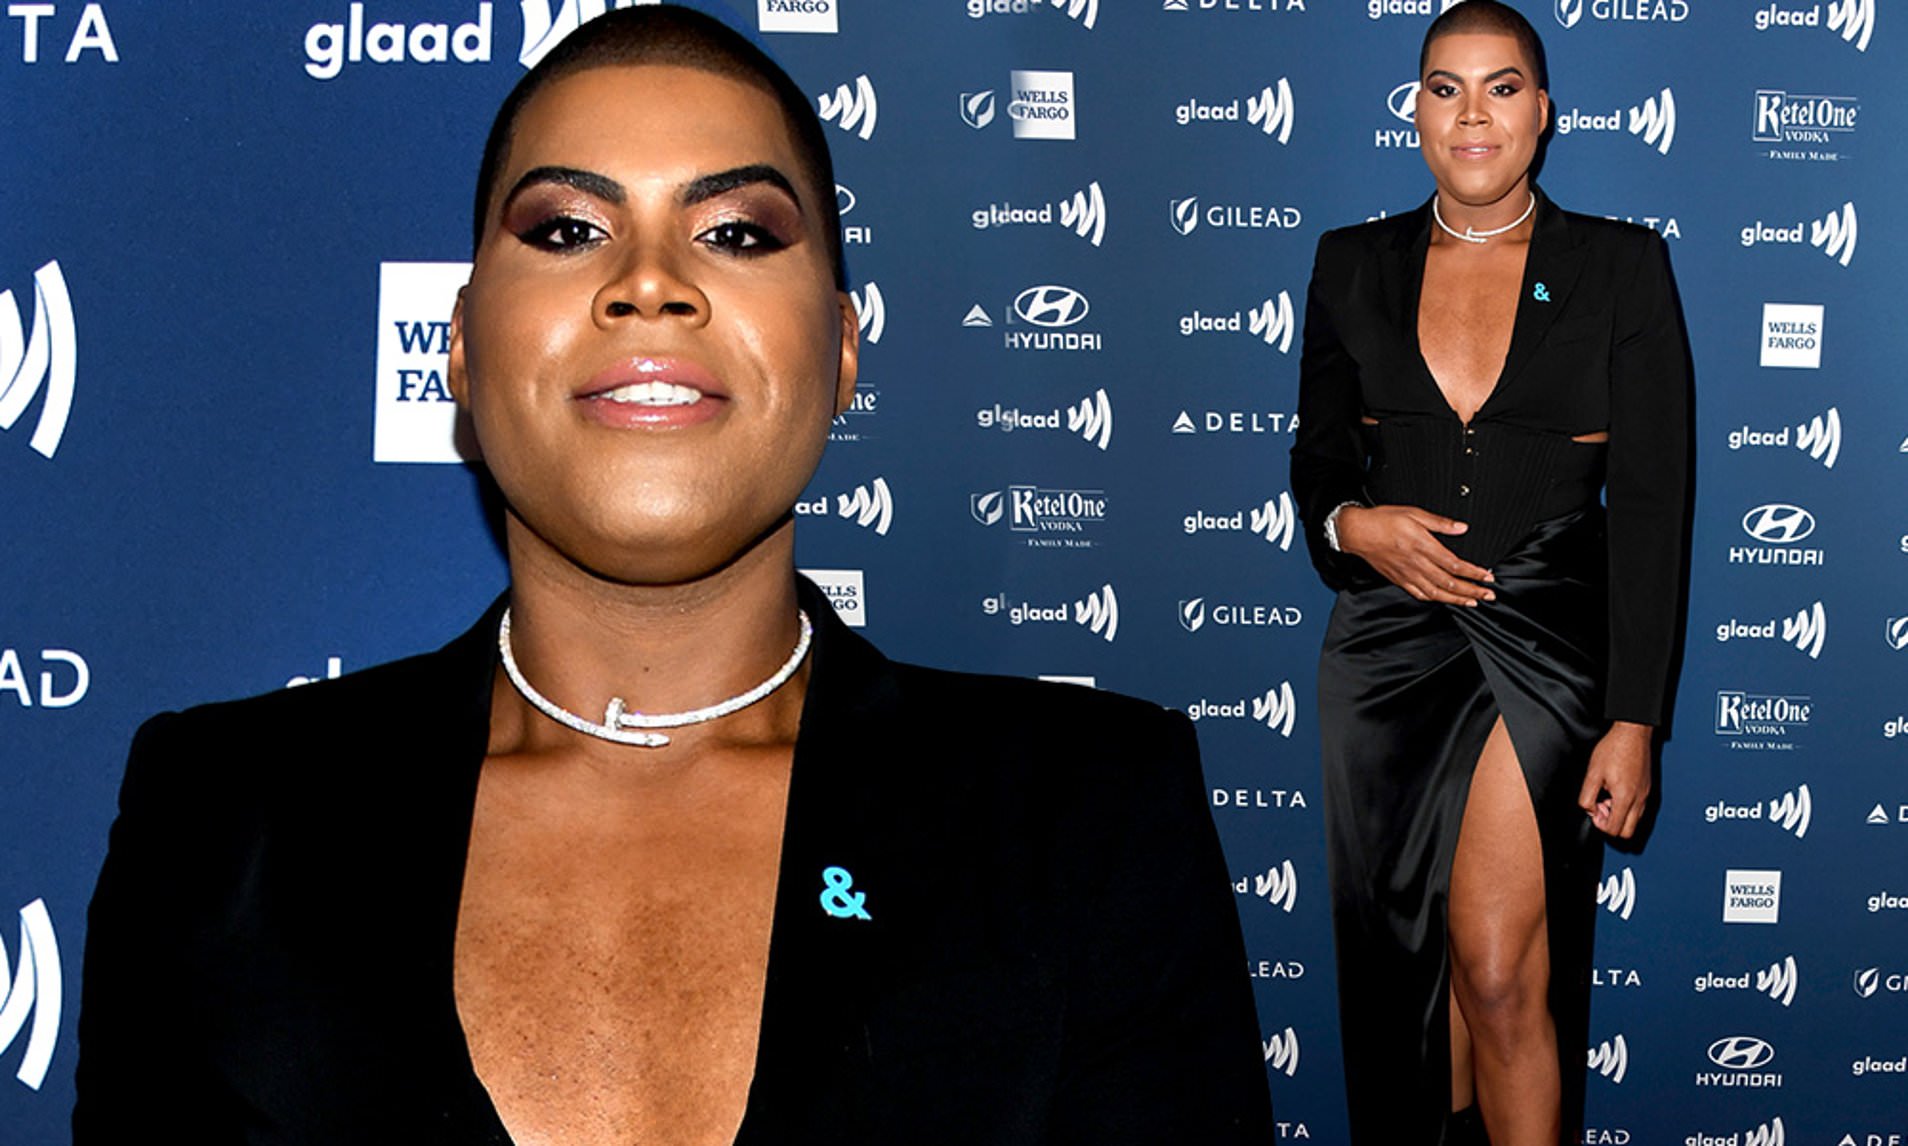 Magic Johnson's son EJ Johnson of Rich Kids Of Beverly Hills fame shows off  his chest | Daily Mail Online